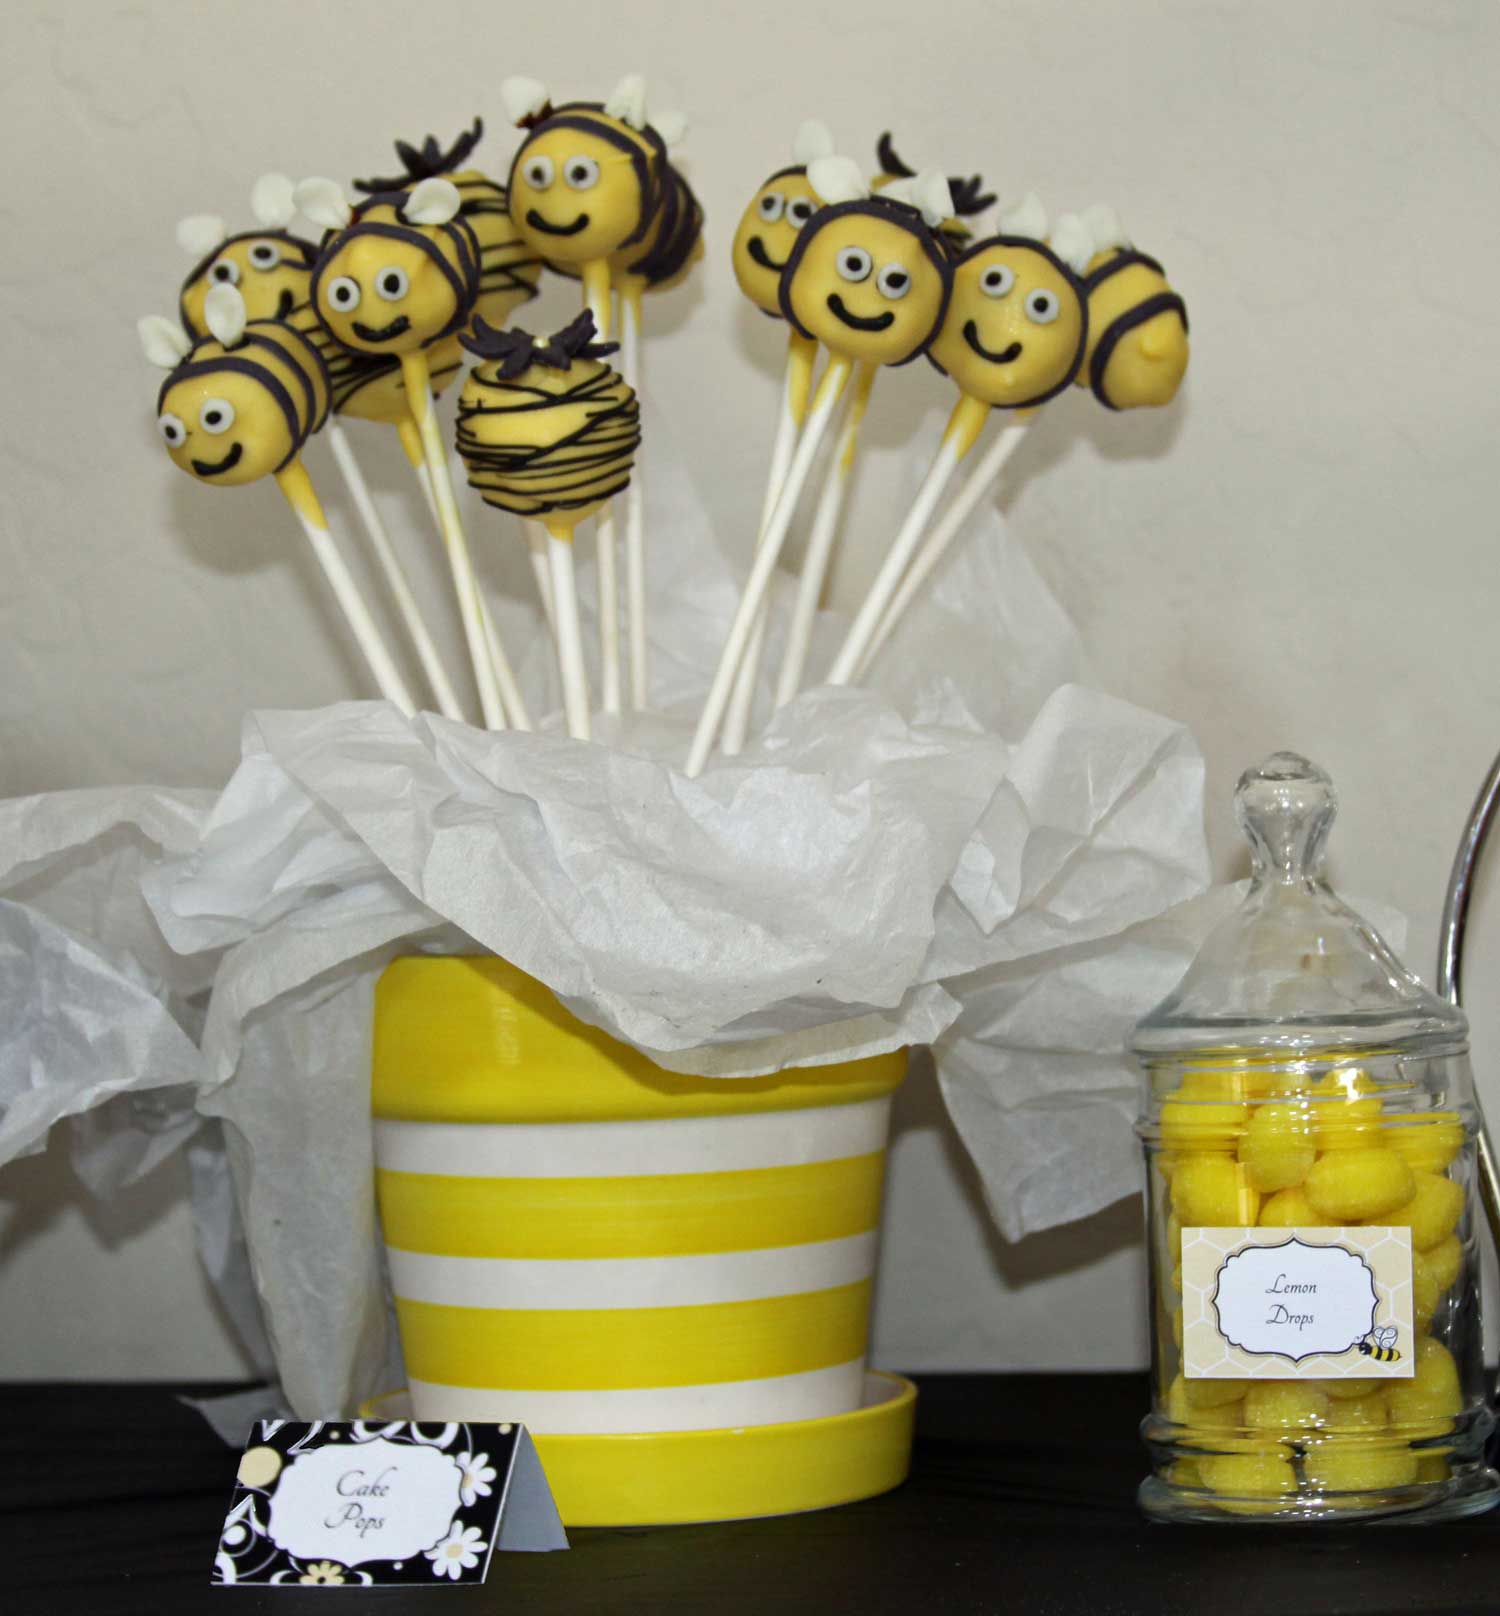 Cake pops shaped lke Bumble Bees